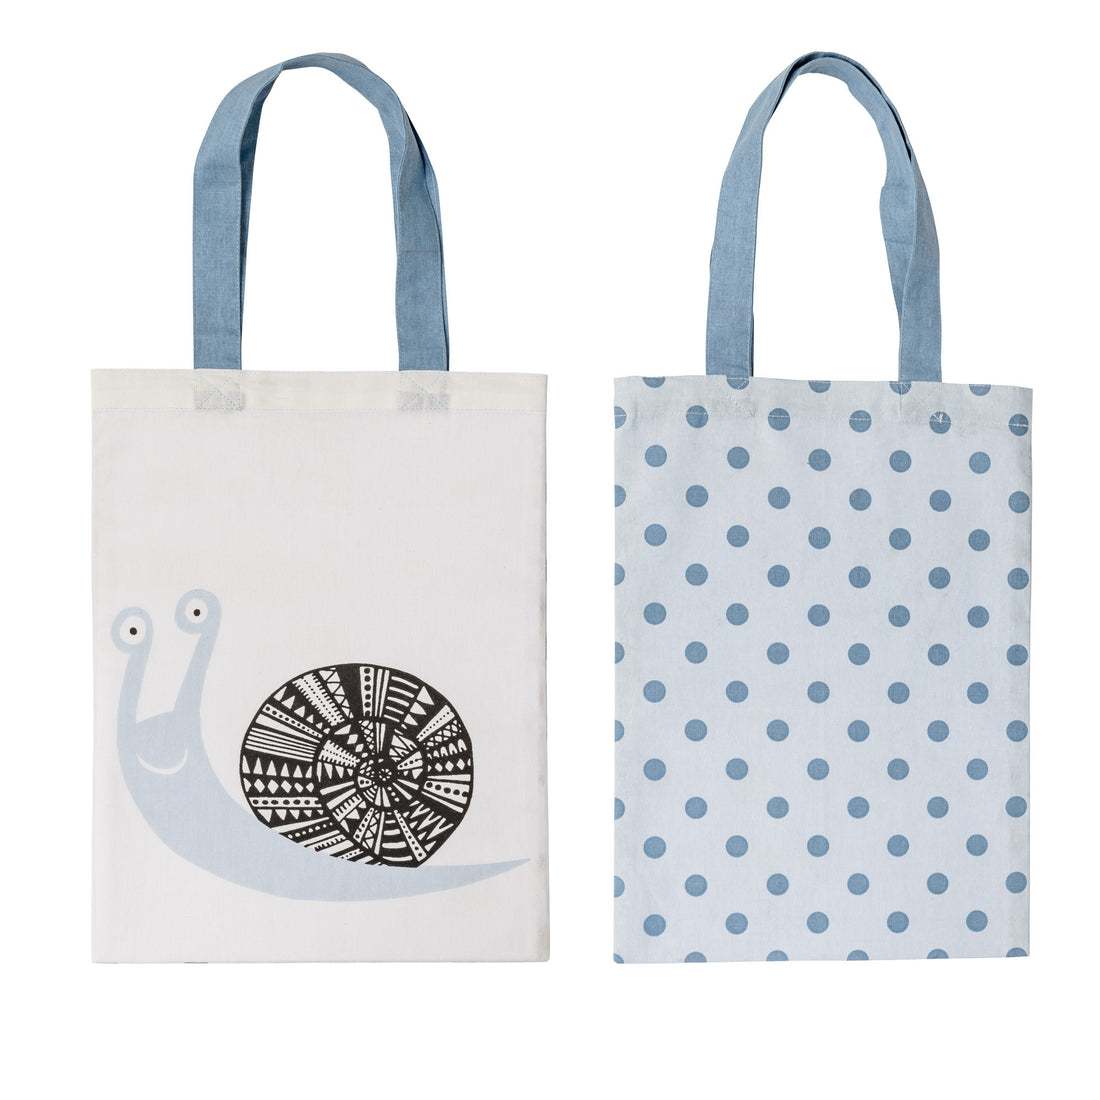 bloomingville-white-with-snail-print-and-dusty-blue-tote-bag-accessory-perm-bmv-95602988-01